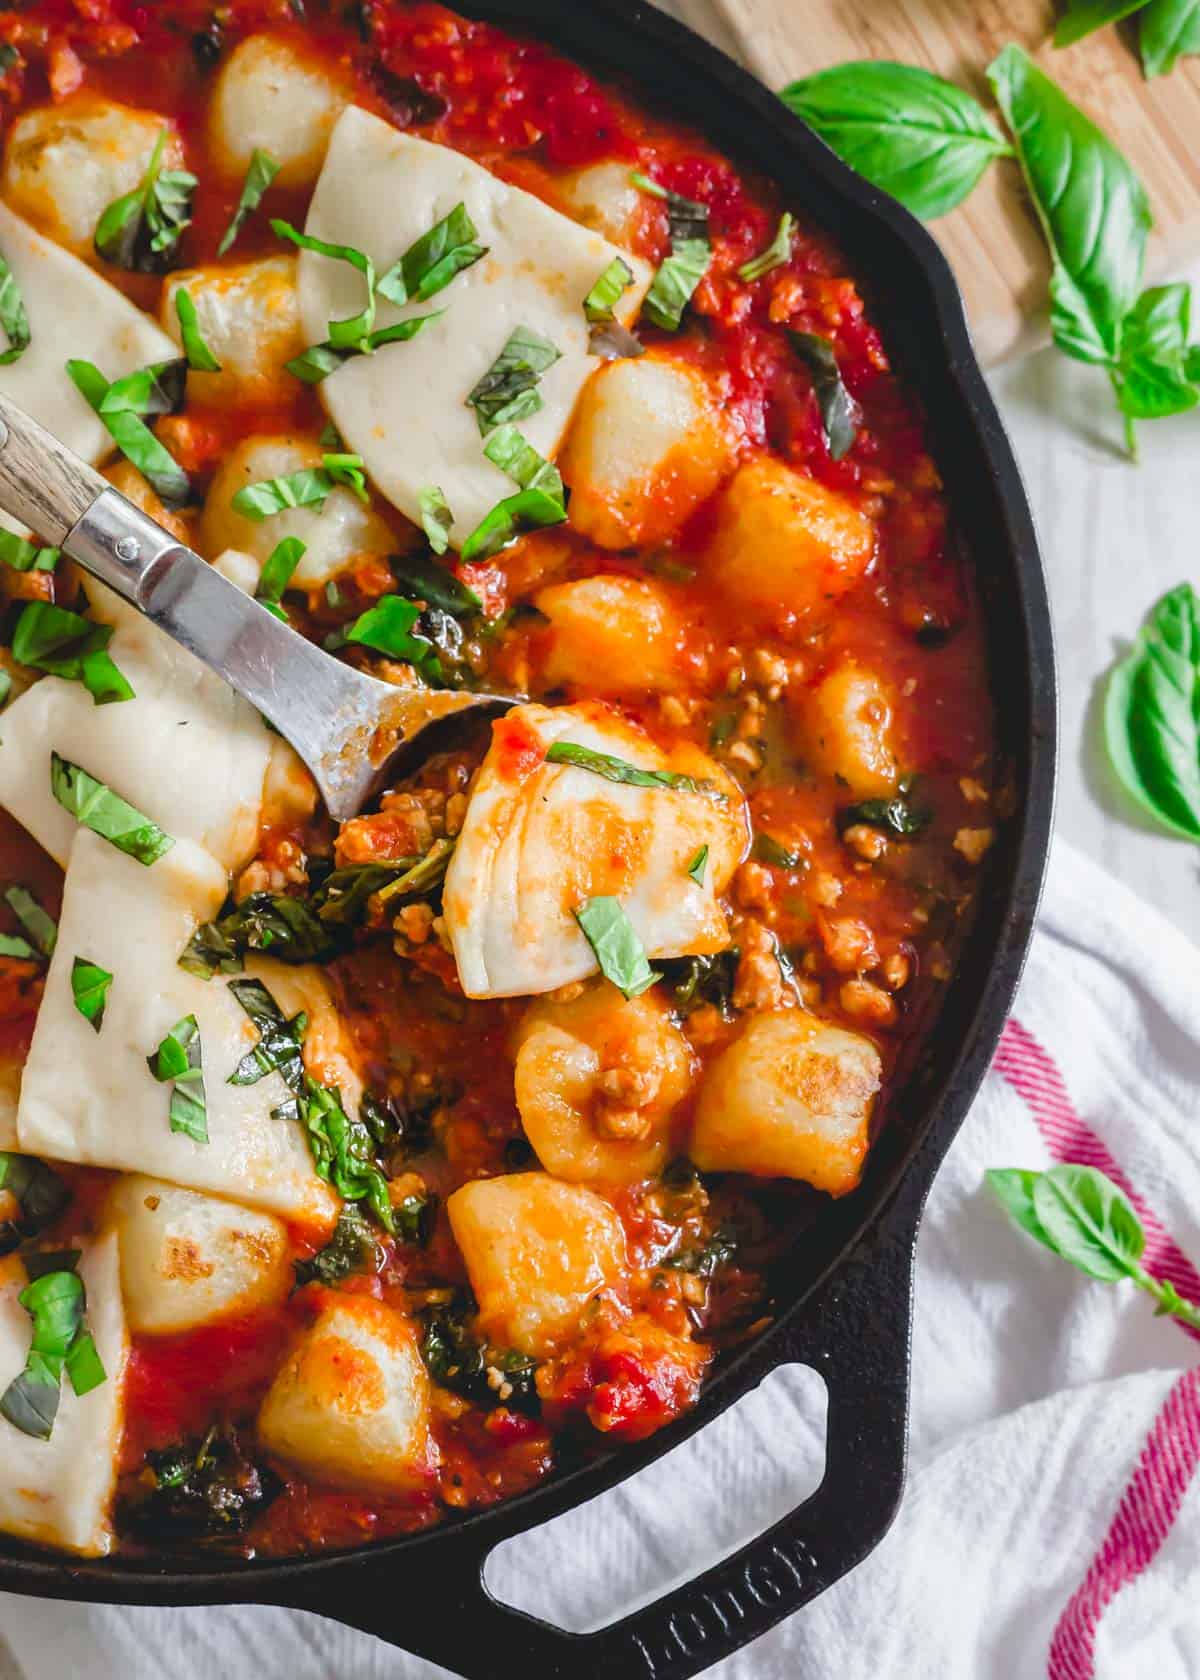 Skillet baked cauliflower gnocchi recipe with pork, tomatoes, spinach and mozzarella.